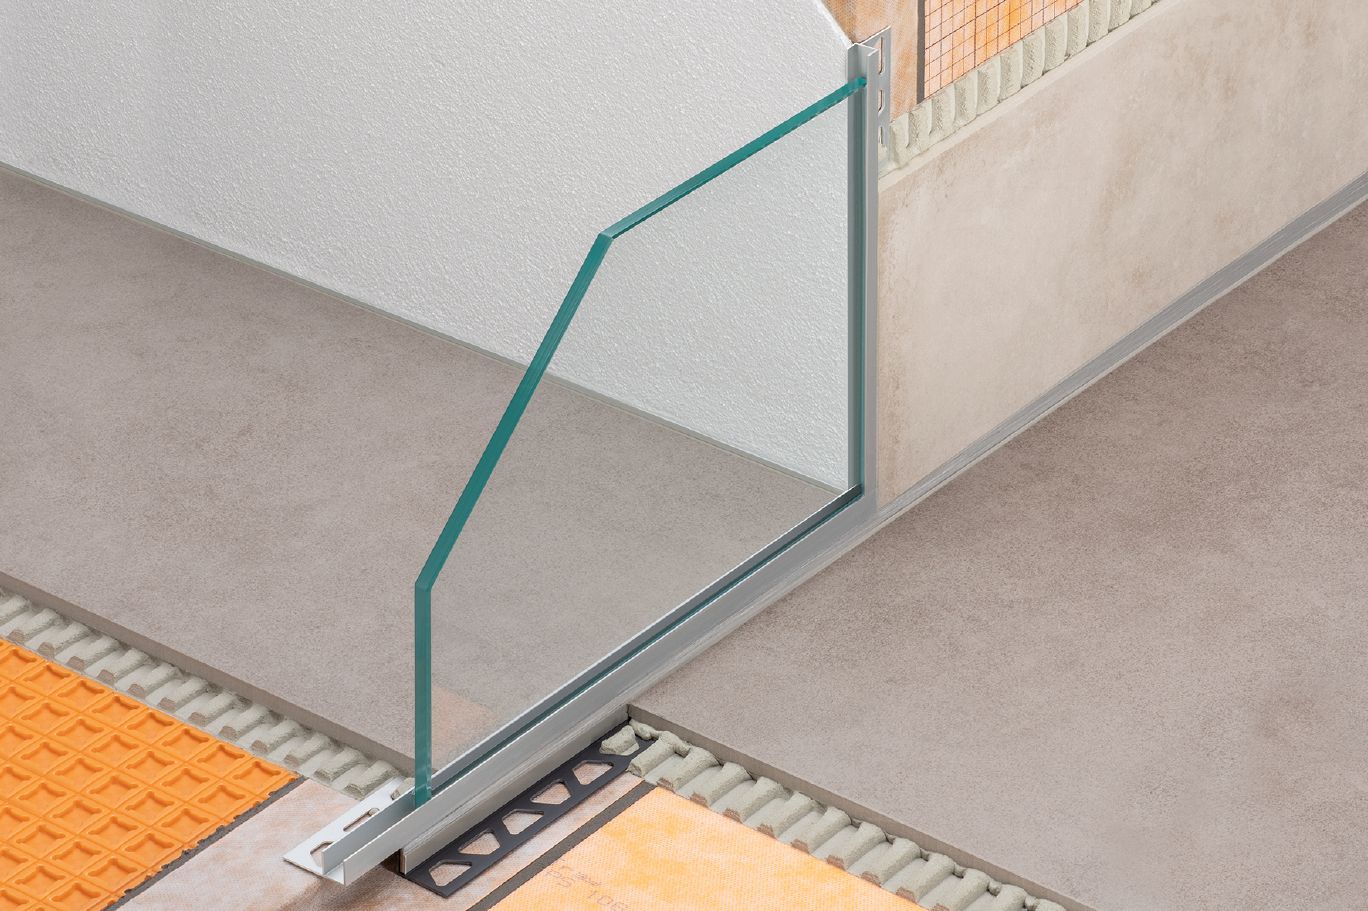 New Schluter Profile Holds fixed GLASS